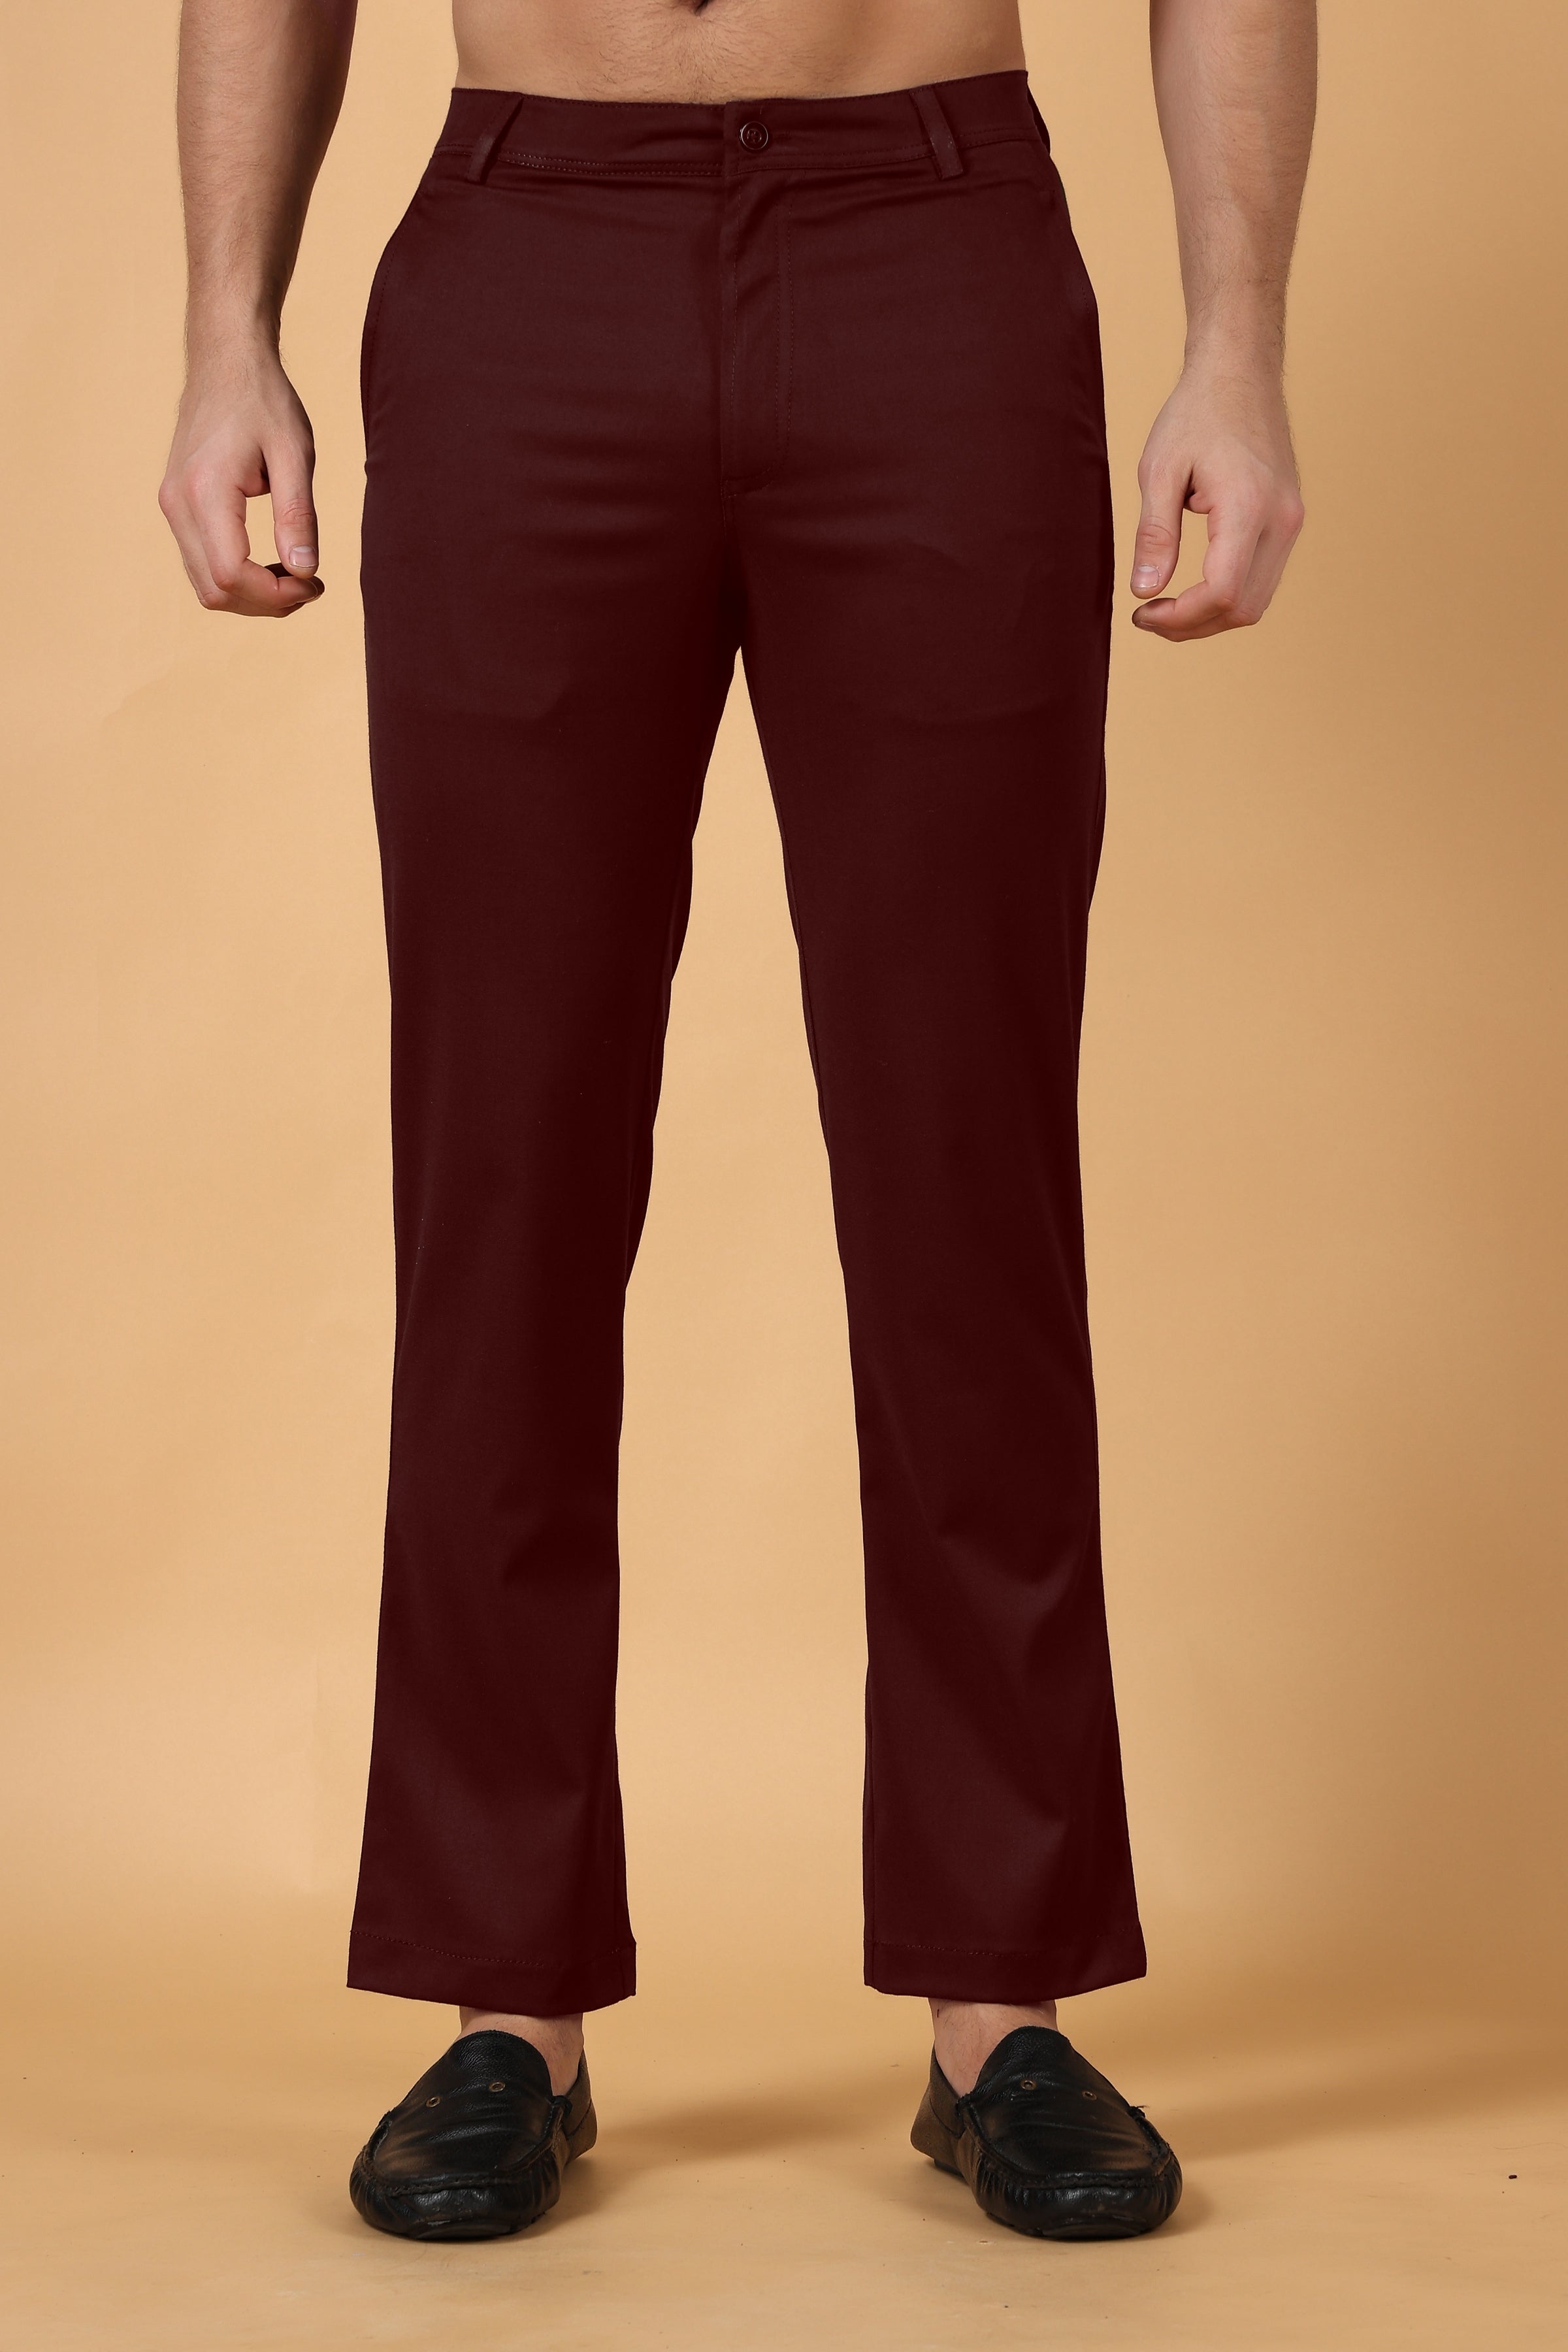 Men Chinos Pants, Casual Wear at Rs 850/piece in Gurgaon | ID: 23269923630